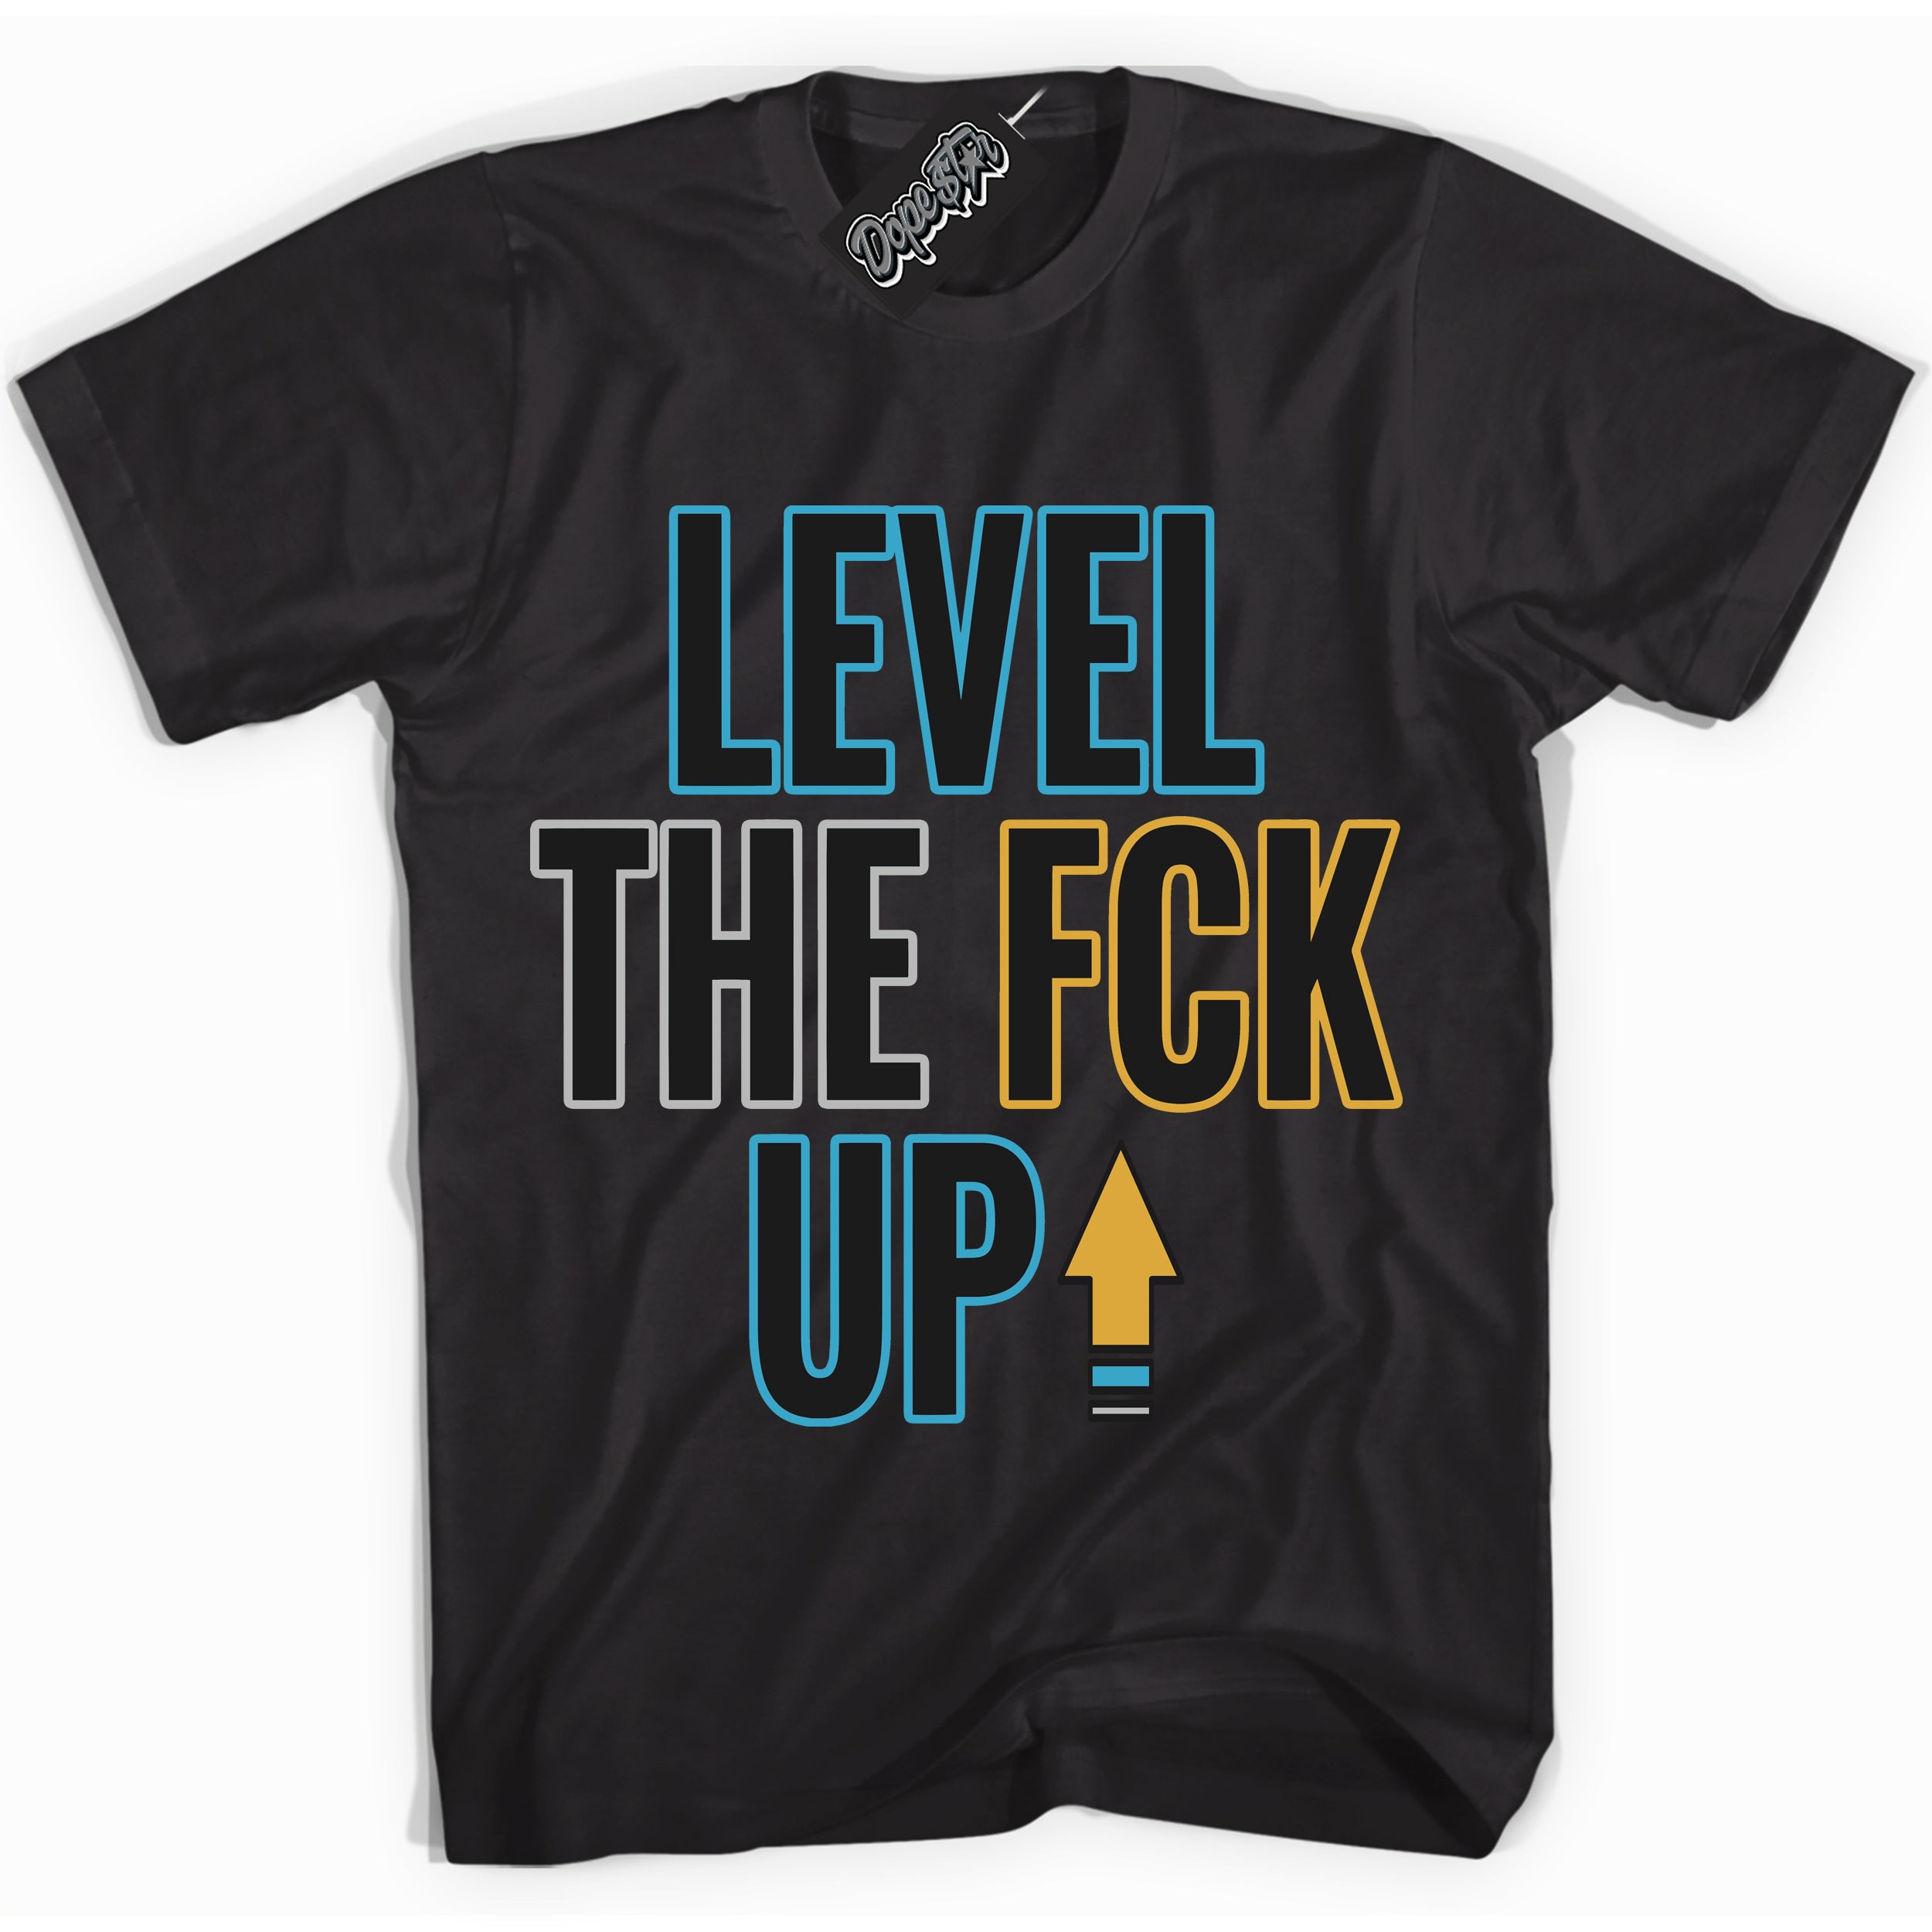 Cool Black Shirt with “ Level The Fck Up” design that perfectly matches Aqua 5s Sneakers.